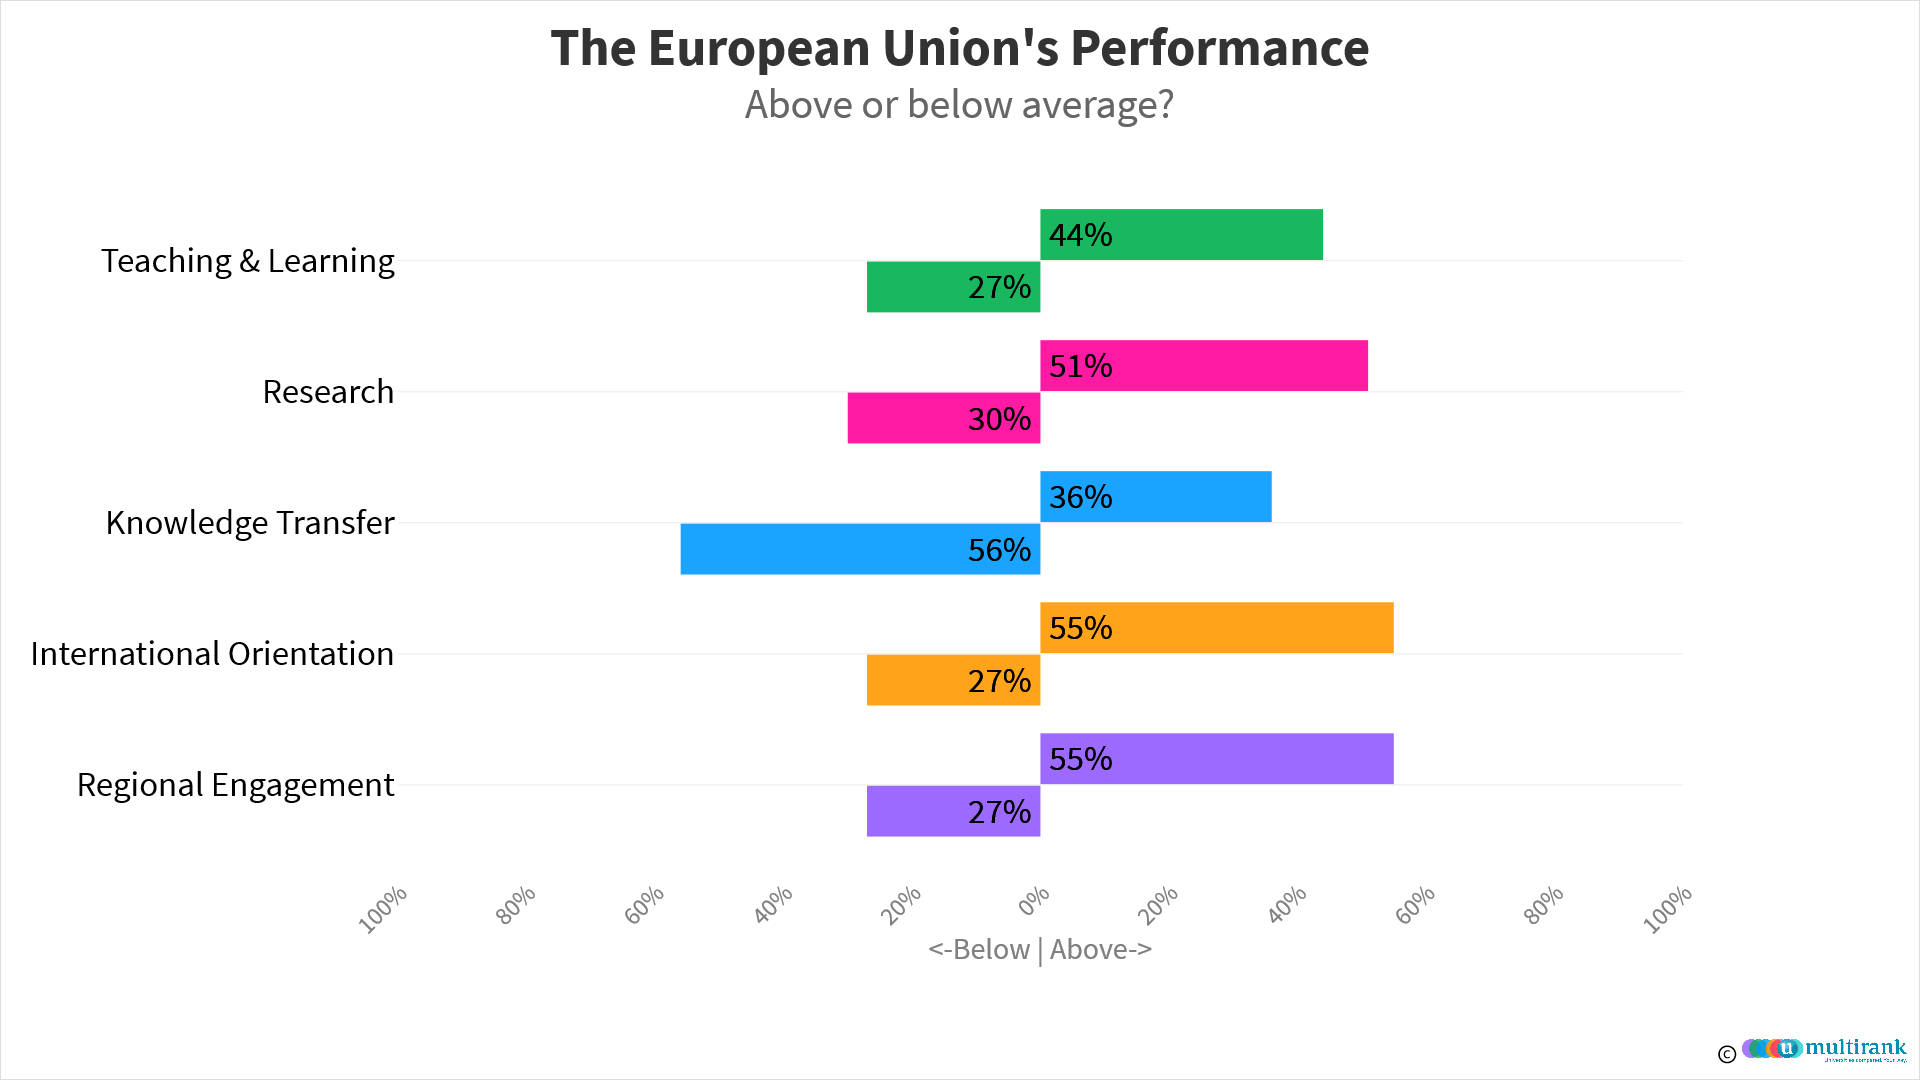 Performance of the EU's higher education system